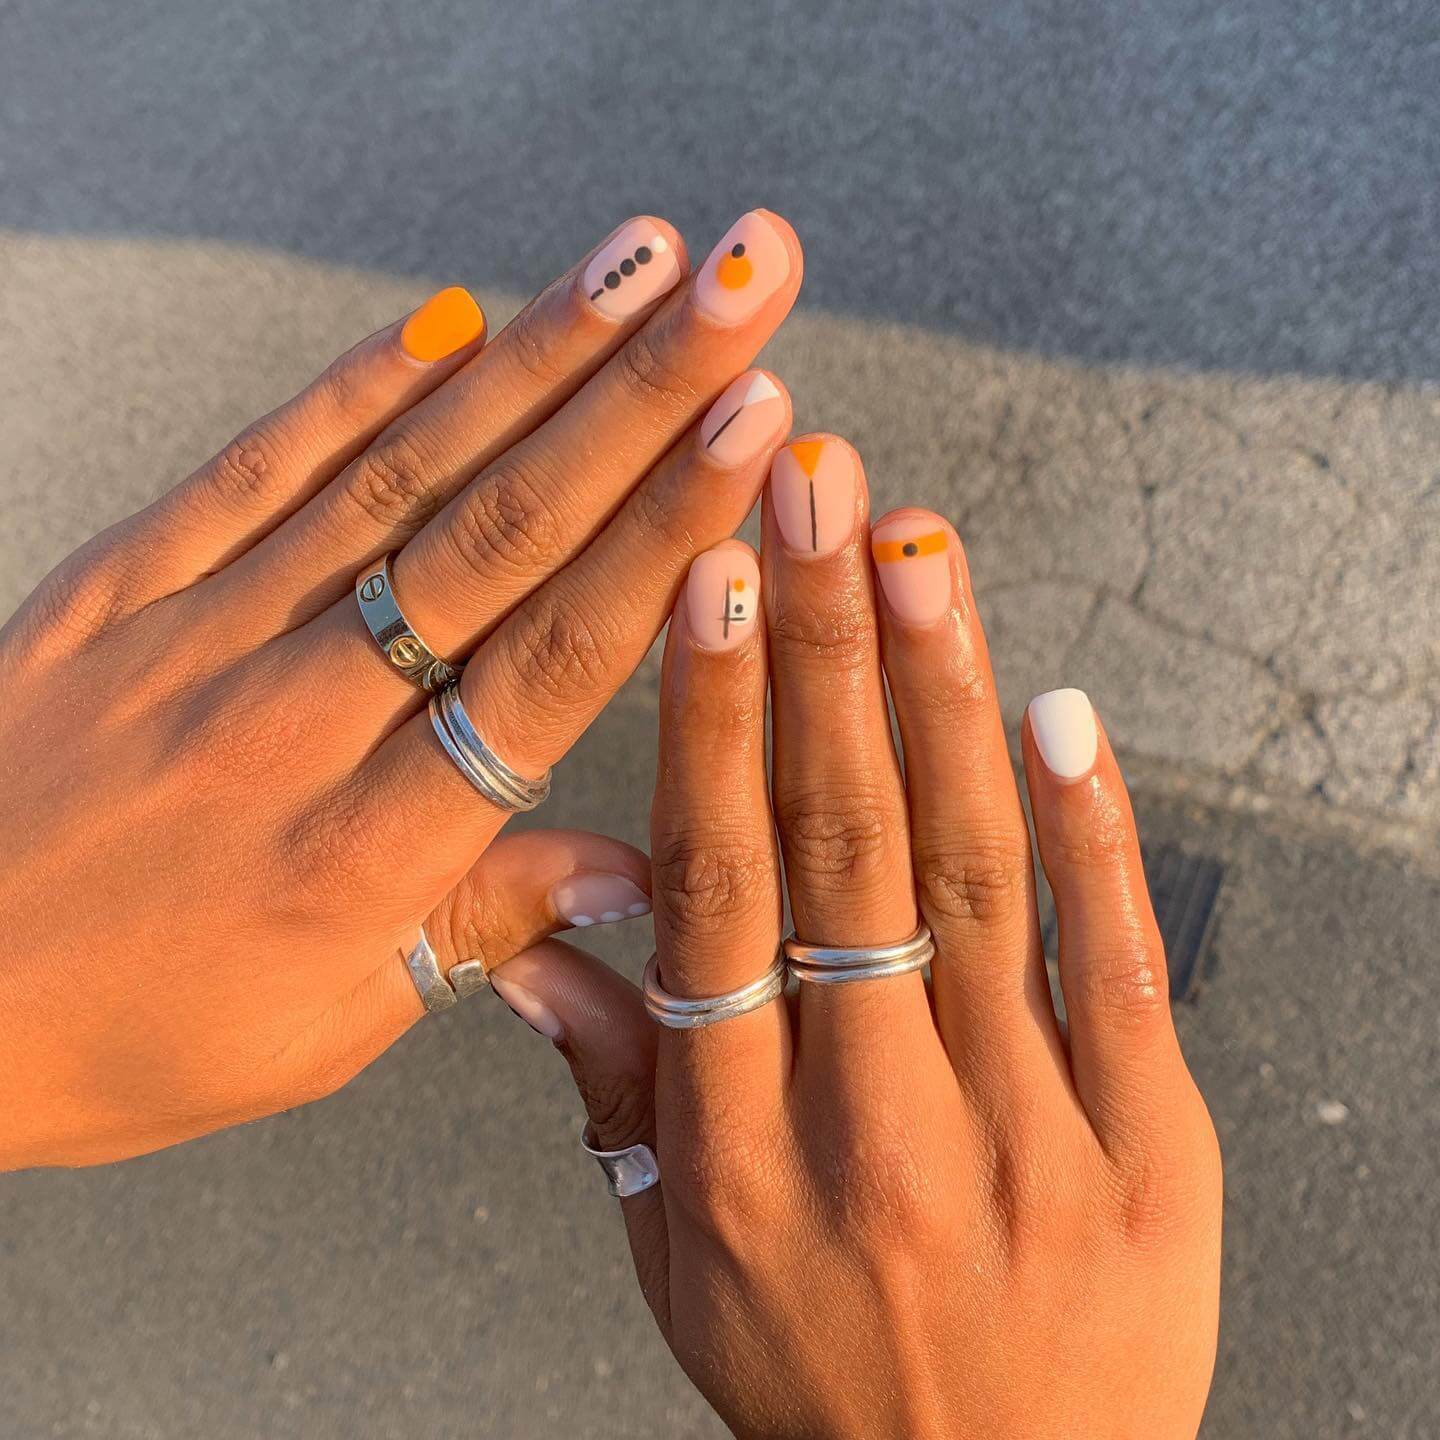 23 Fresh Nail Designs To Spice Up Your Spring - 173